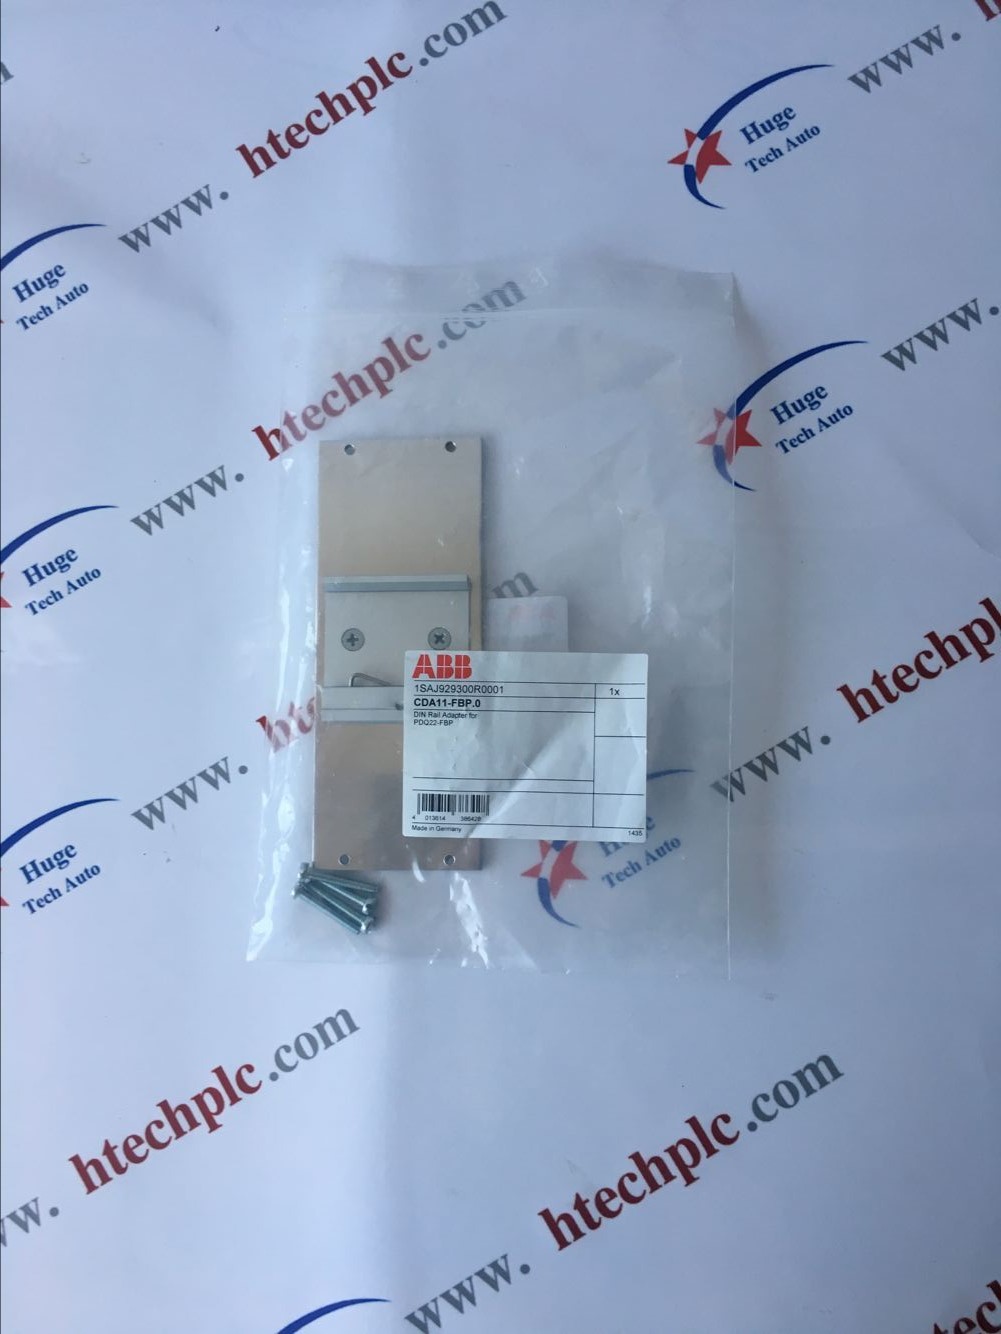 ABB DSTC121 high quality brand new industrial modules with negotiable price 